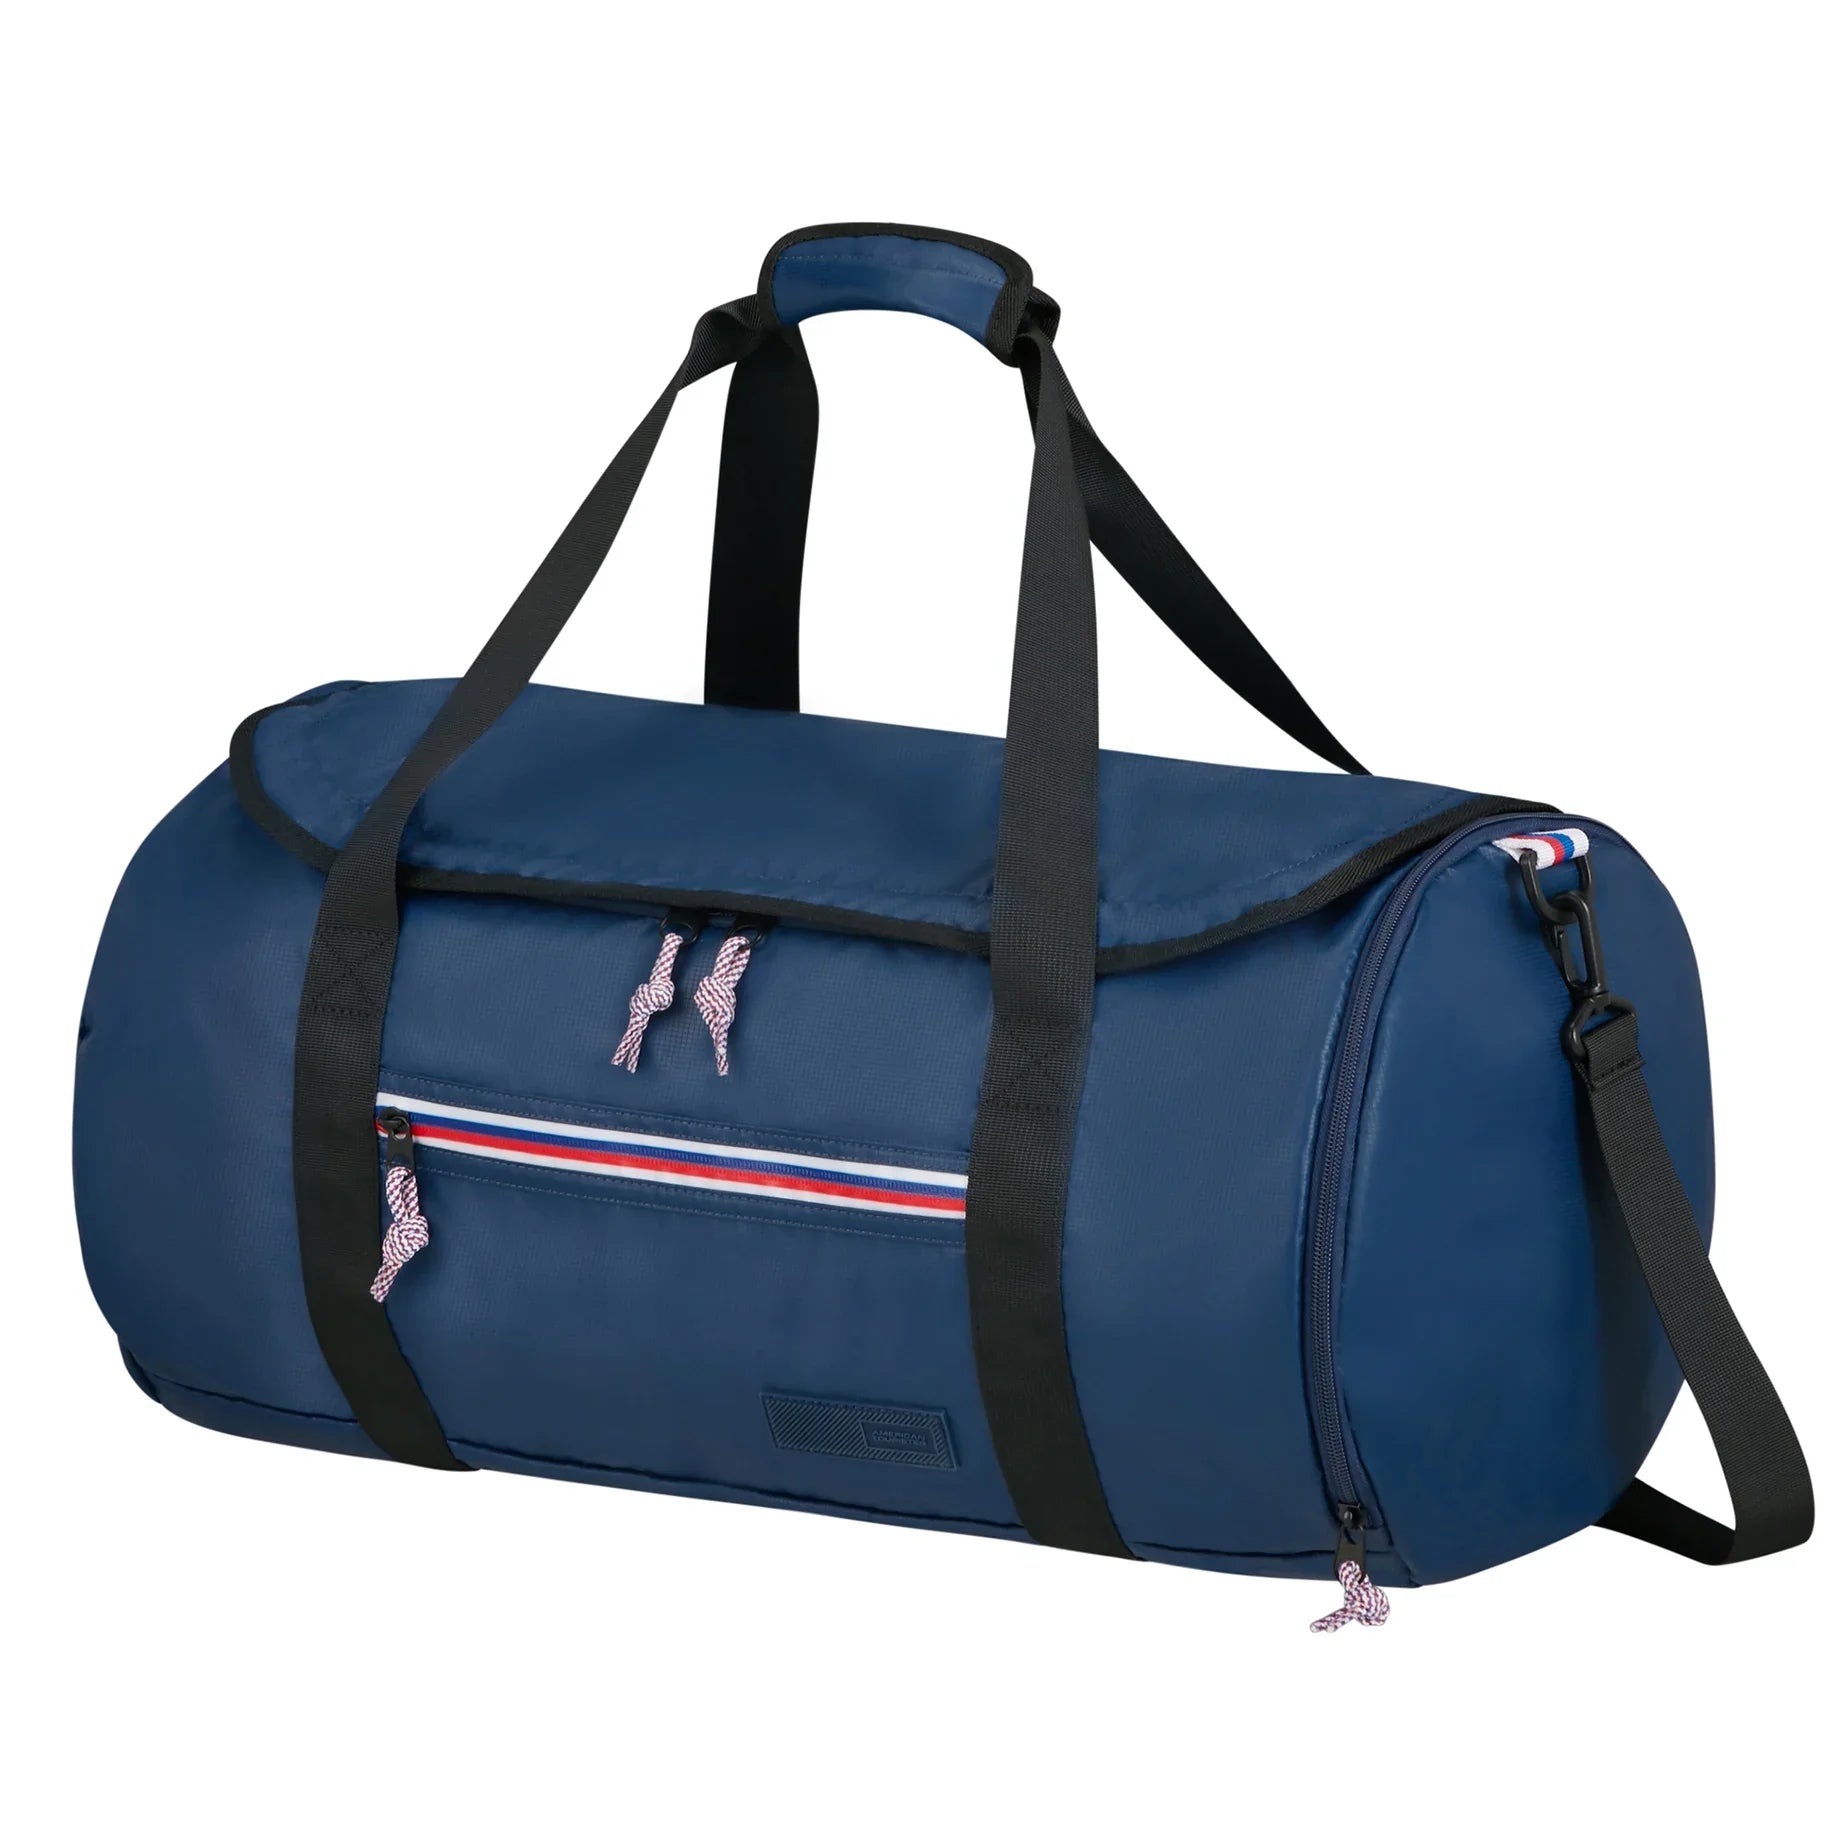 American Tourister Upbeat Pro coated travel bag 55 cm - Navy